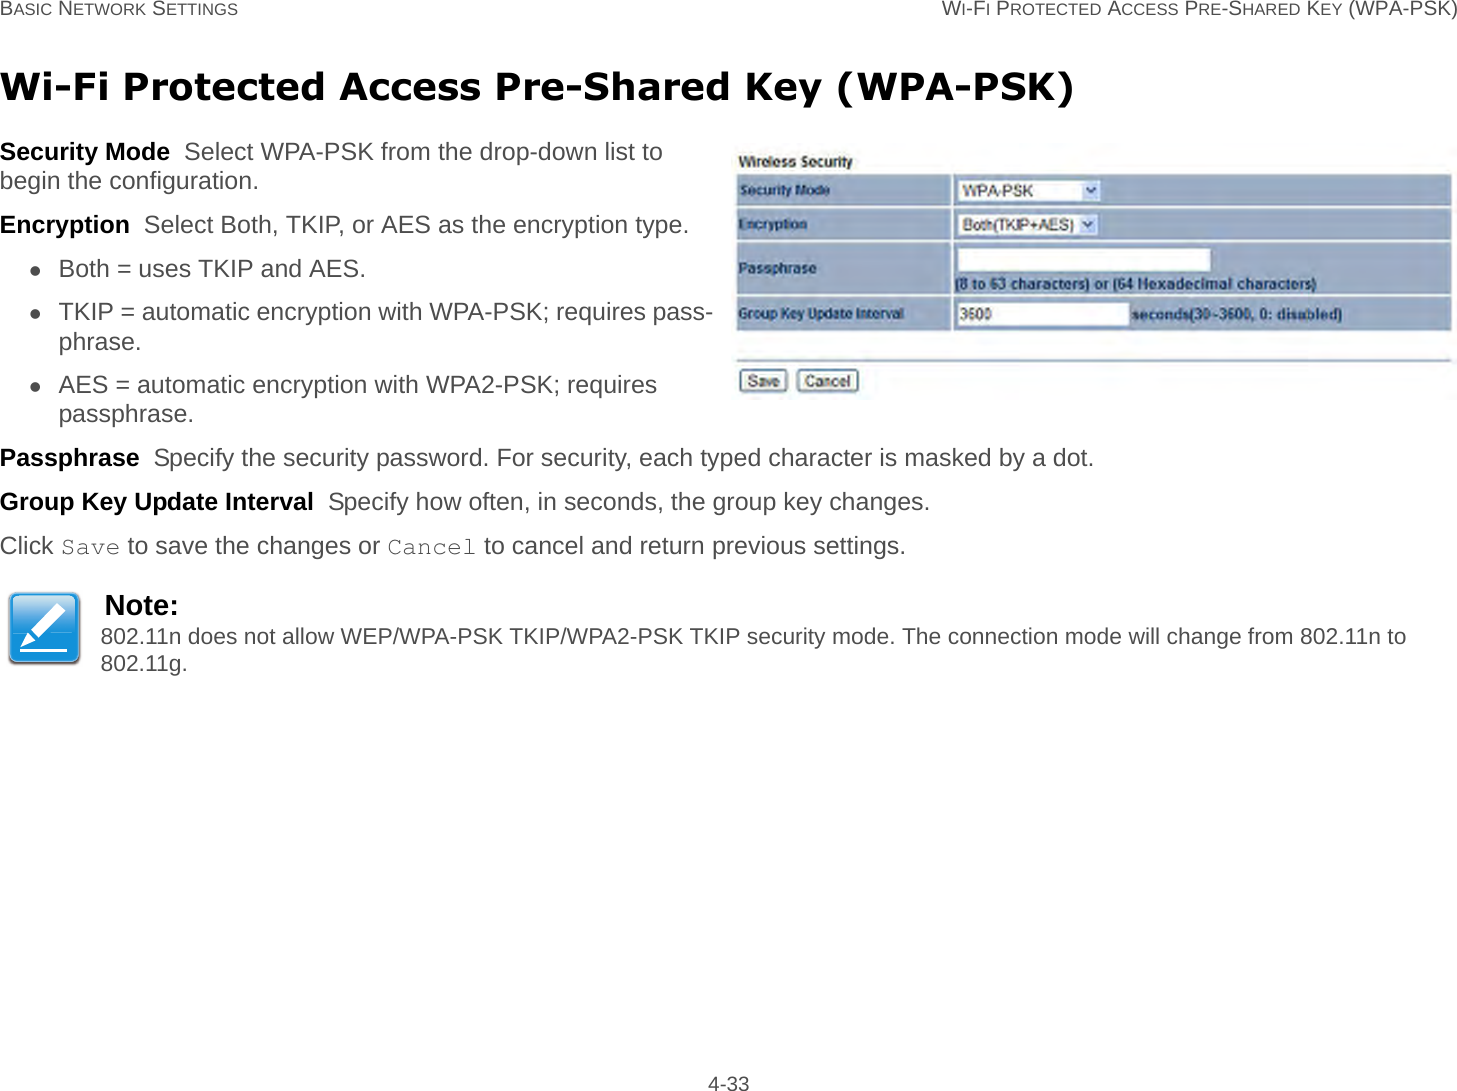 BASIC NETWORK SETTINGS WI-FI PROTECTED ACCESS PRE-SHARED KEY (WPA-PSK) 4-33Wi-Fi Protected Access Pre-Shared Key (WPA-PSK)Security Mode  Select WPA-PSK from the drop-down list to begin the configuration.Encryption  Select Both, TKIP, or AES as the encryption type.Both = uses TKIP and AES.TKIP = automatic encryption with WPA-PSK; requires pass-phrase.AES = automatic encryption with WPA2-PSK; requires passphrase.Passphrase  Specify the security password. For security, each typed character is masked by a dot.Group Key Update Interval  Specify how often, in seconds, the group key changes.Click Save to save the changes or Cancel to cancel and return previous settings.Note:802.11n does not allow WEP/WPA-PSK TKIP/WPA2-PSK TKIP security mode. The connection mode will change from 802.11n to 802.11g.